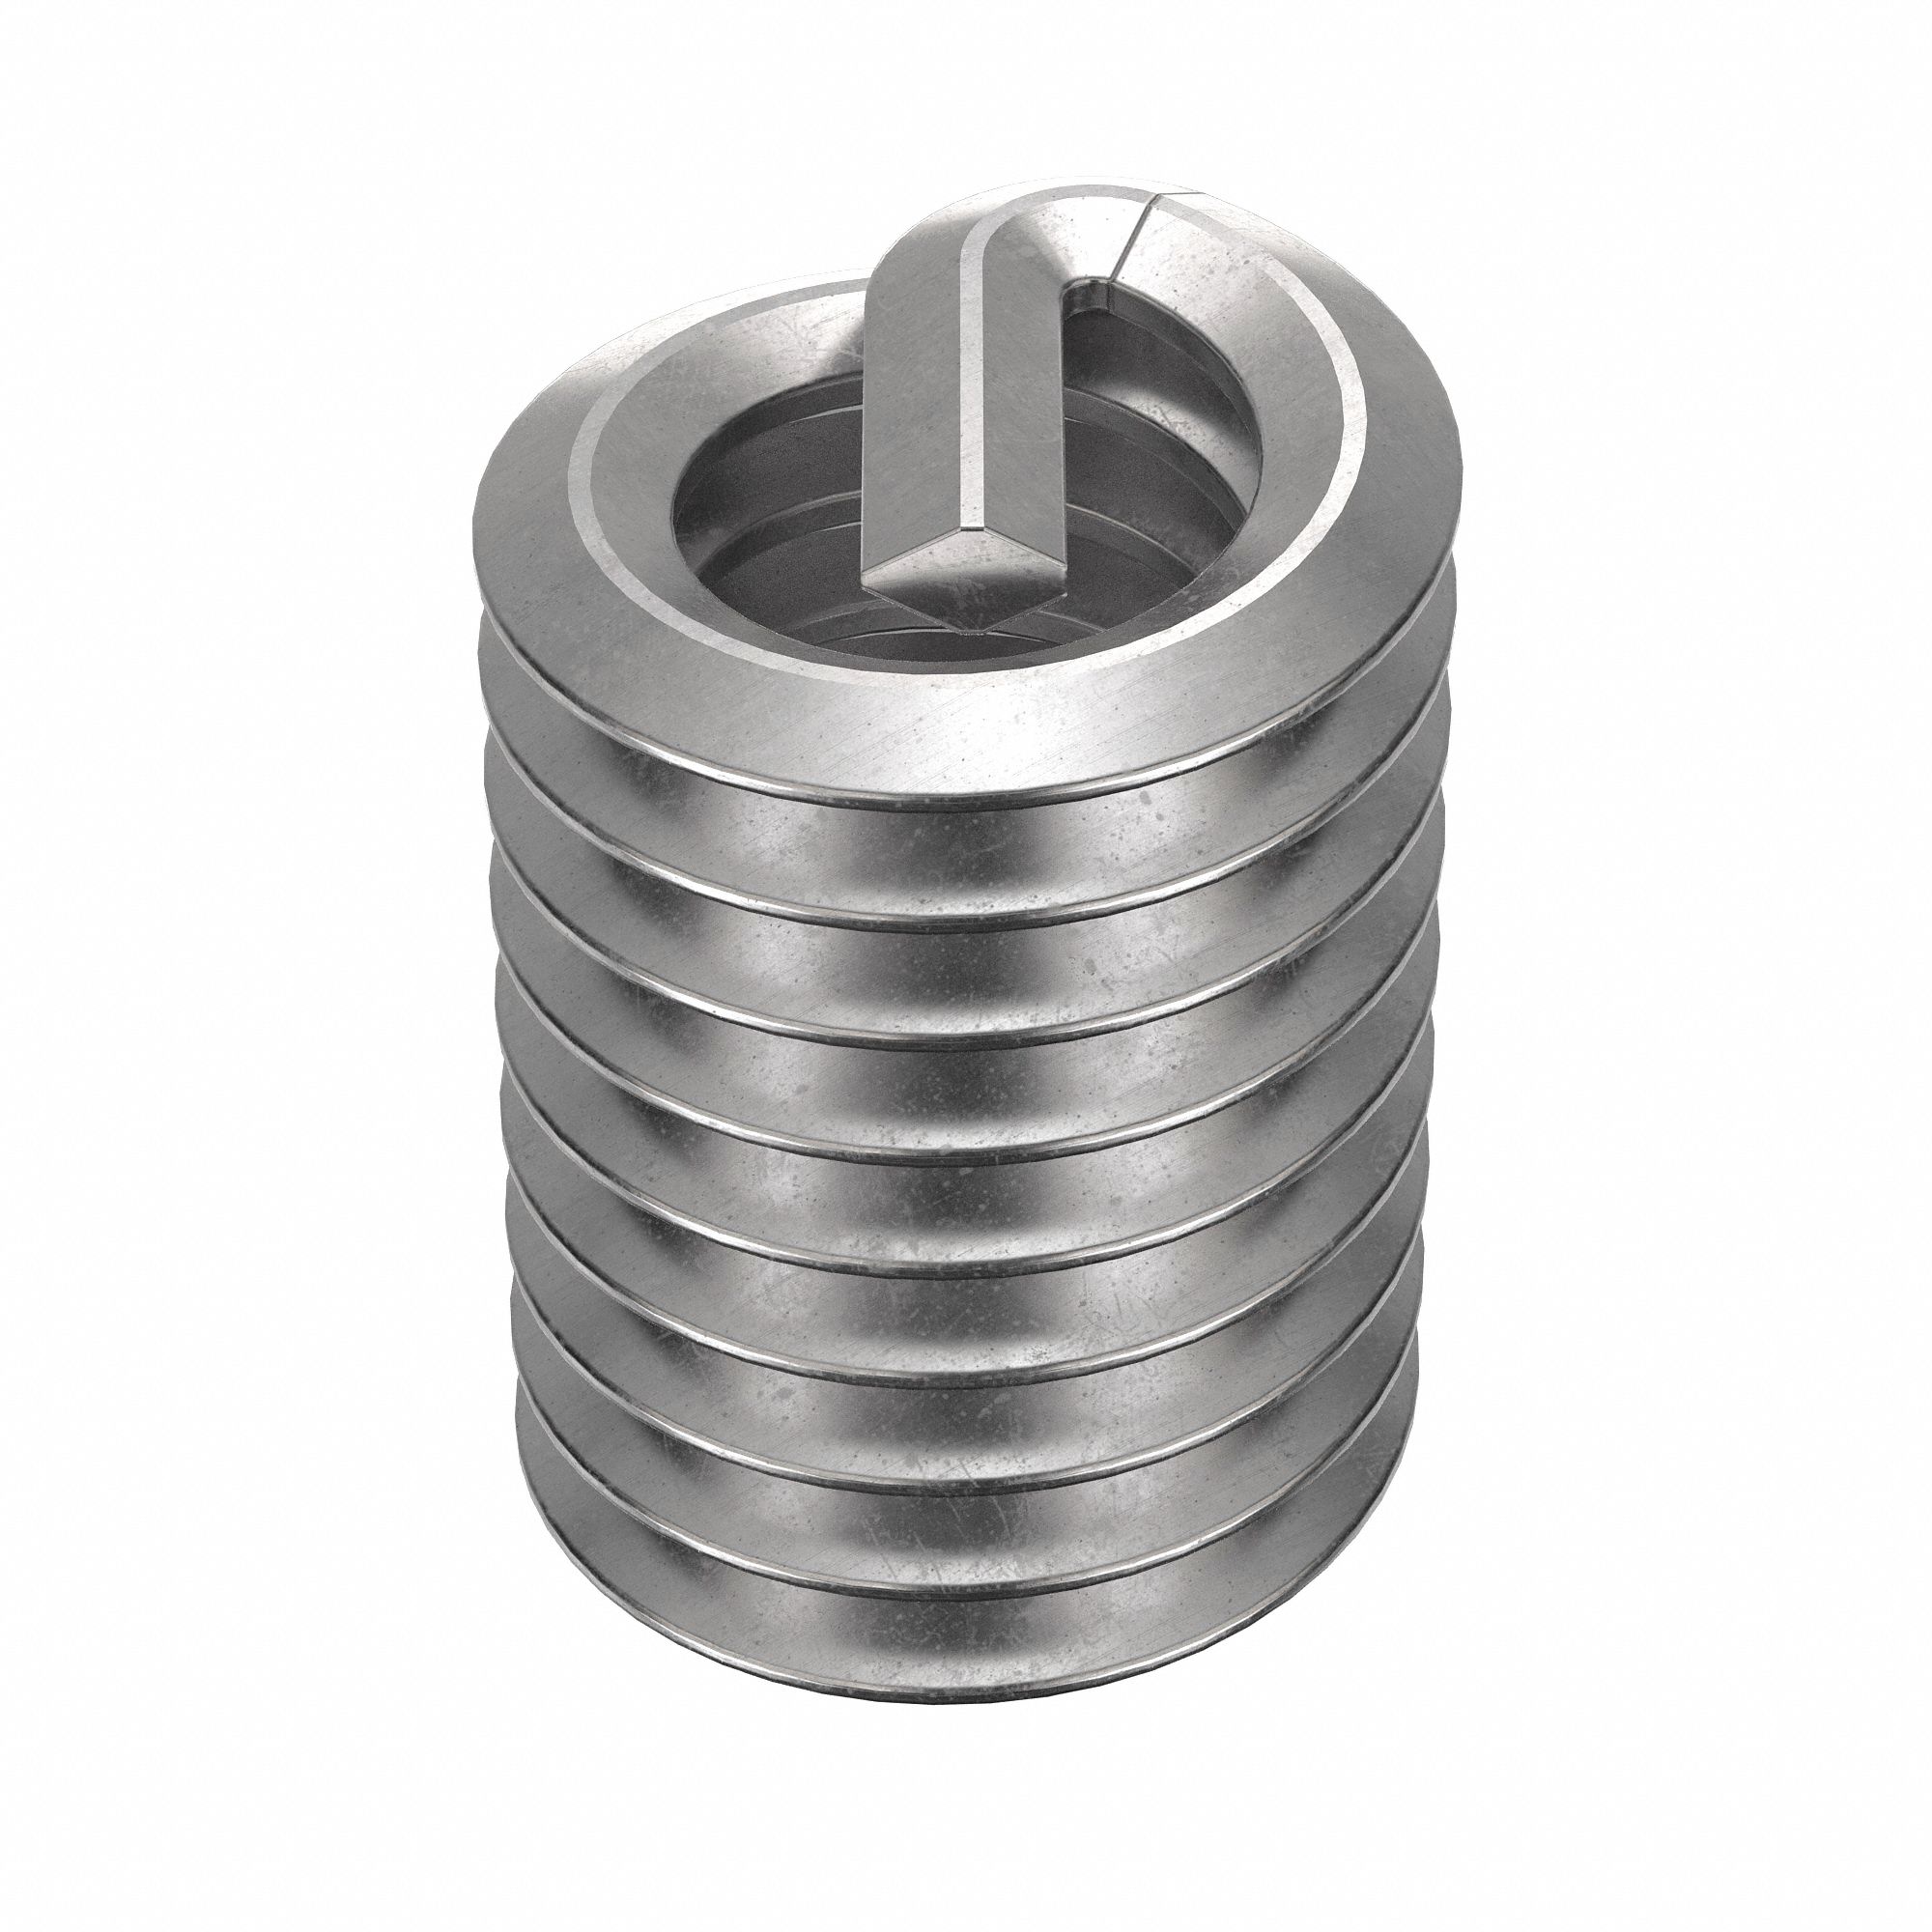 APPROVED VENDOR Helical Insert: Tanged Tang Style, Free-Running, 1/4